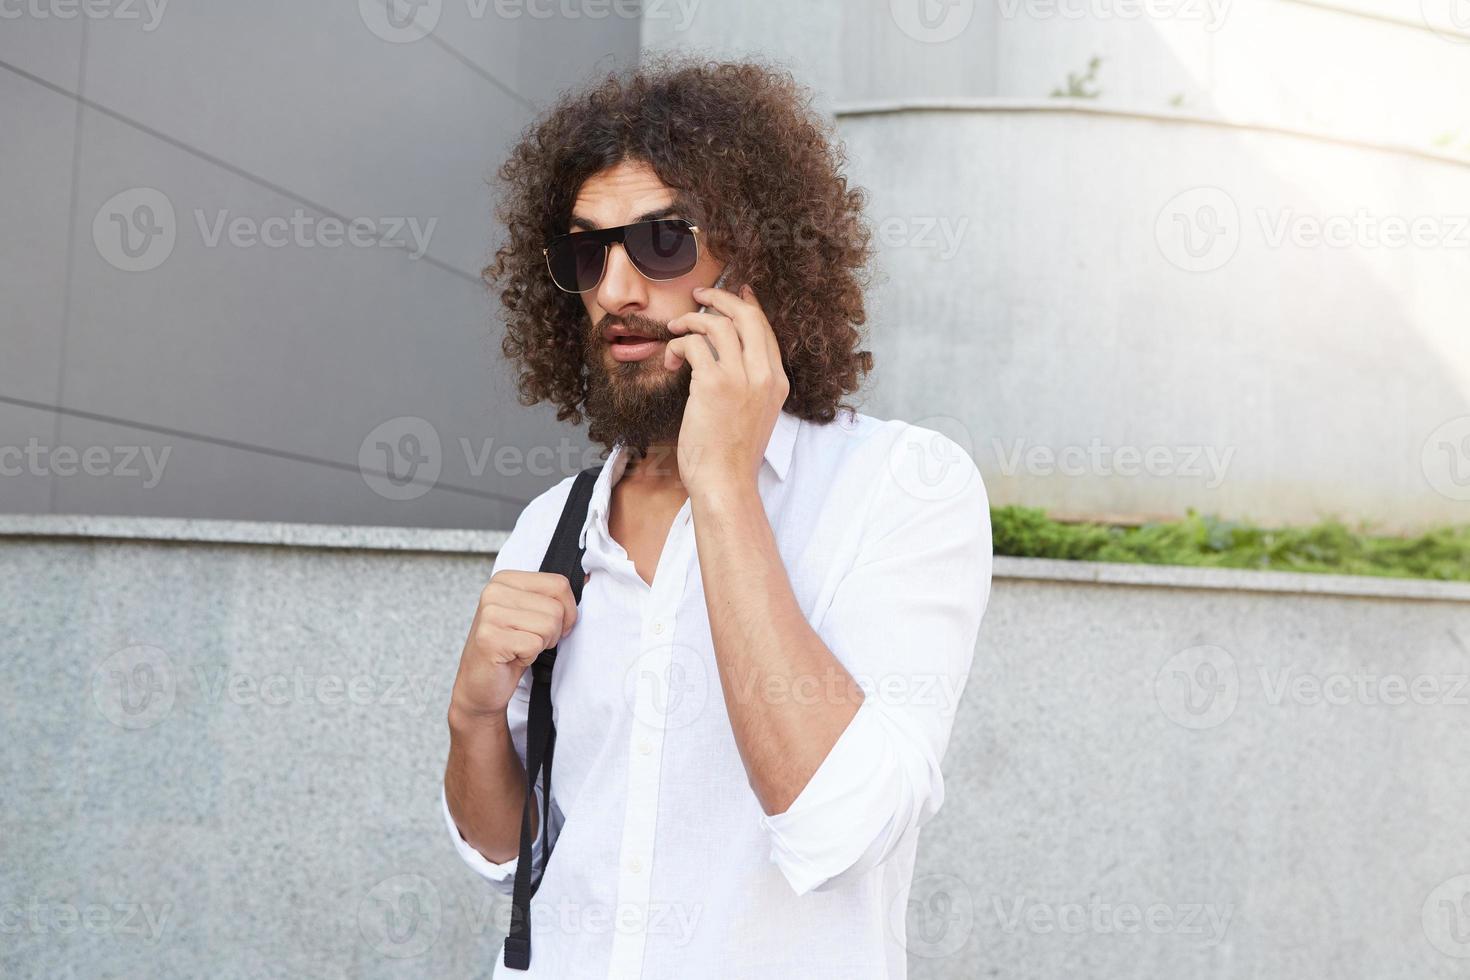 Attractive bearded young male with dark curly hair walking down the street while having important phone conversation, wearing white shirt and black backpack photo